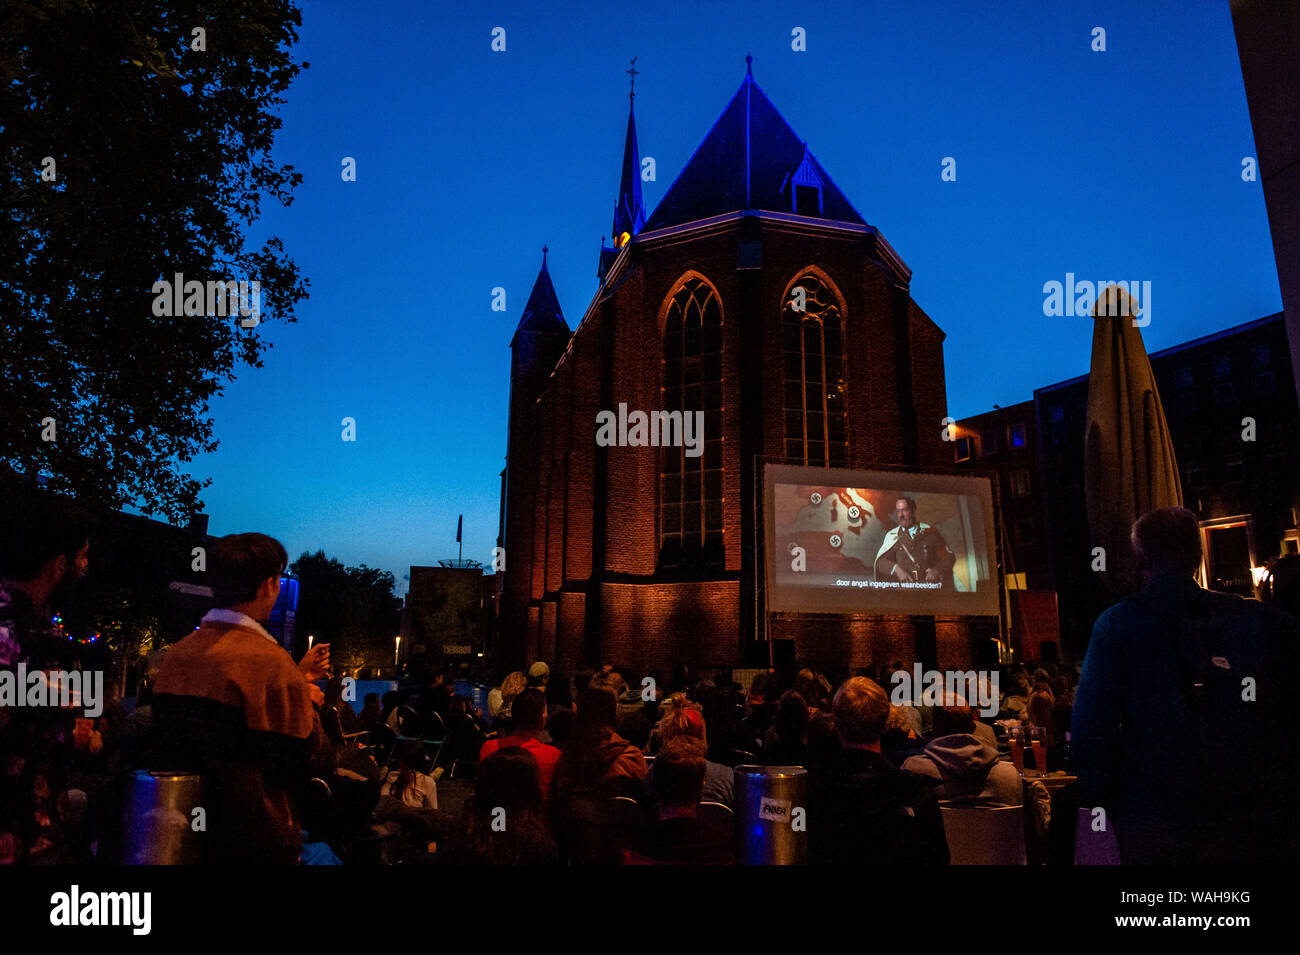 Nijmegen, Gelderland, Netherlands. 20th Aug, 2019. A big screen is being situated outside the church.Because the last film of Quentin Tarantino was released this month, LUX an independent and liberal platform in Nijmegen for new developments in art and culture offered an open-air cinema screenings of his well-known films, like Four Rooms and Pulp Fiction. Hundreds of people could enjoy for free the movies, like Four Rooms and Pulp Fiction in a very Tarantino style. Credit: Ana Fernandez/SOPA Images/ZUMA Wire/Alamy Live News Stock Photo